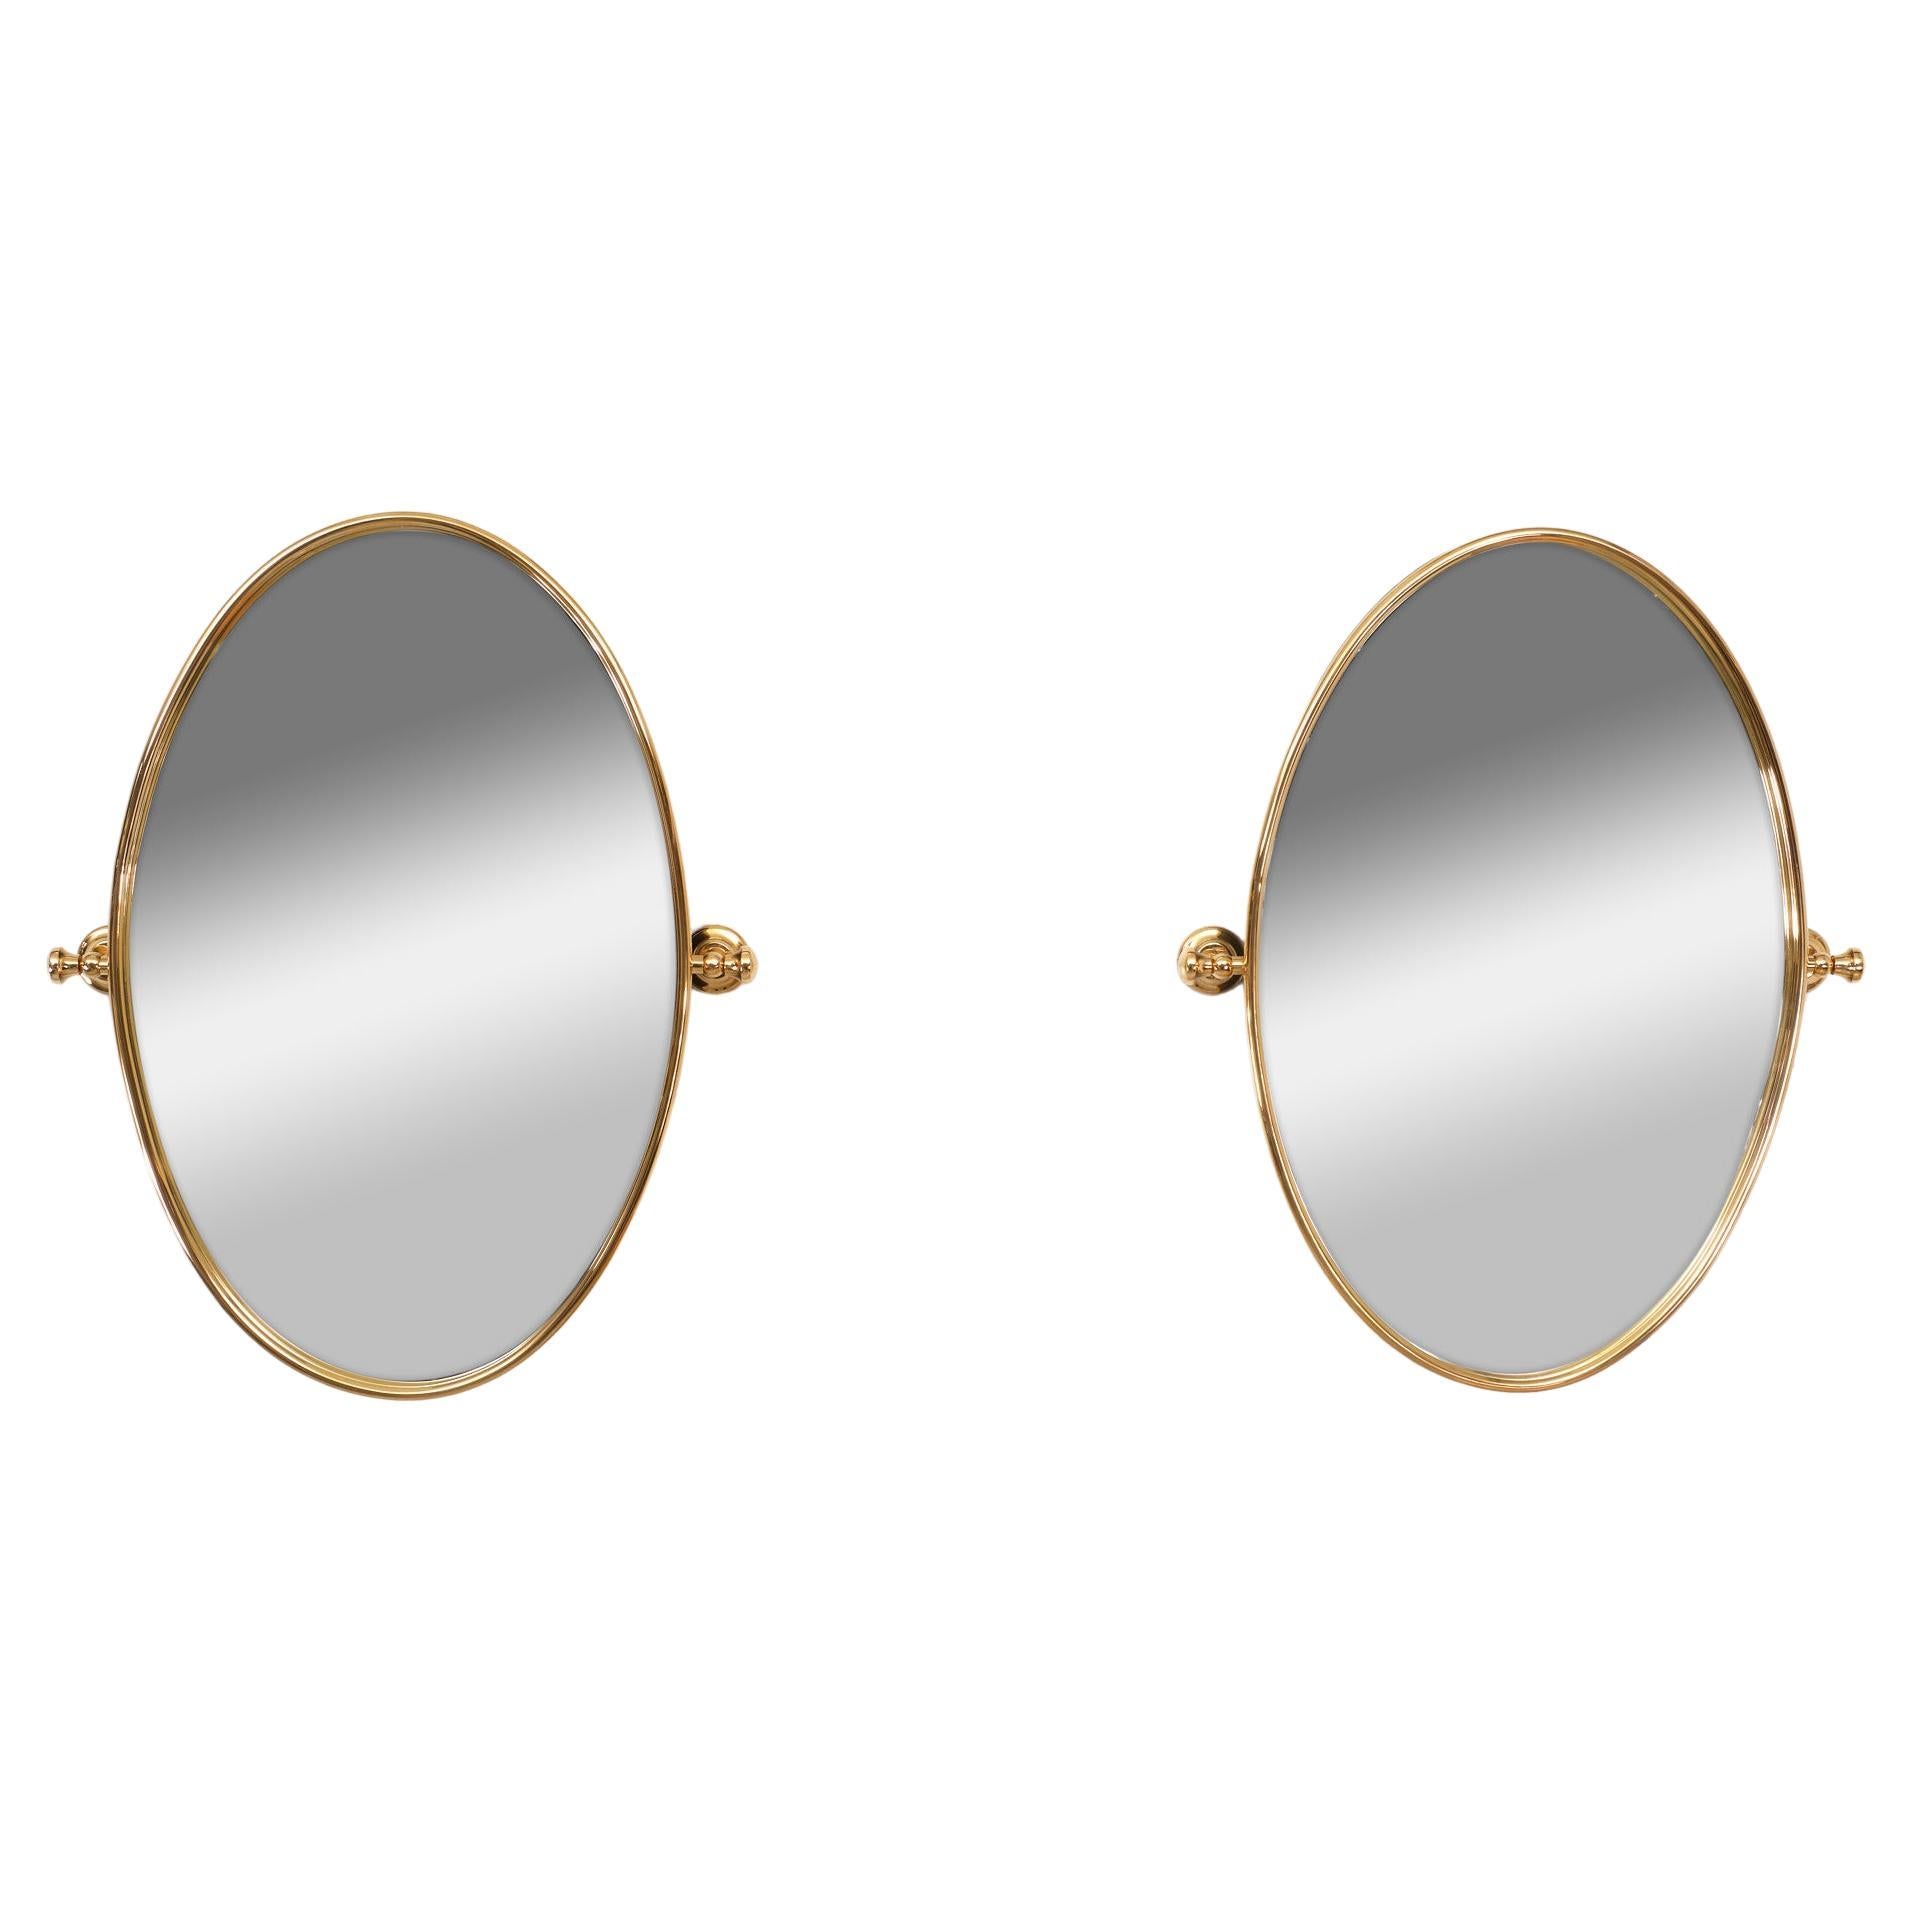 Exclusive Set tilting Brass bath room wall Mirrors. Top quality . Beautiful Gold color . 1970s 
no screws to see, solid Brass armature.  
 
Please don't hesitate to reach out for alternative shipping quote